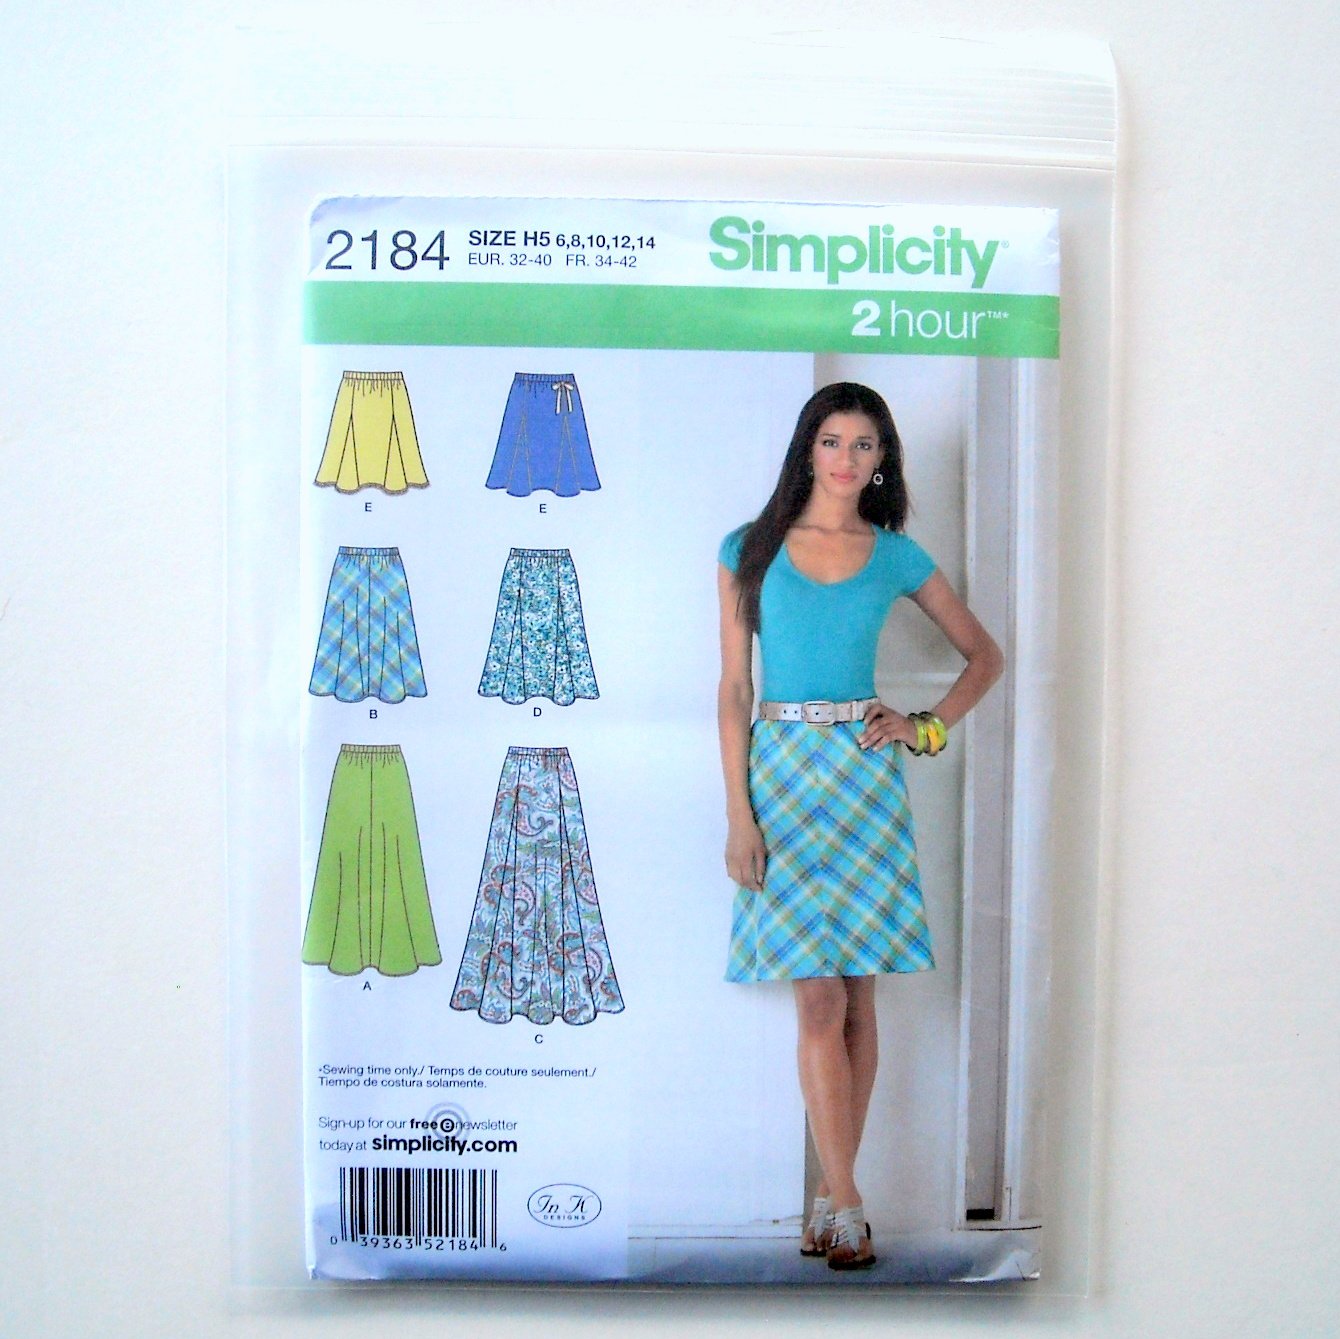 Simplicity 2 Hour Misses Skirts Sewing Pattern 2184